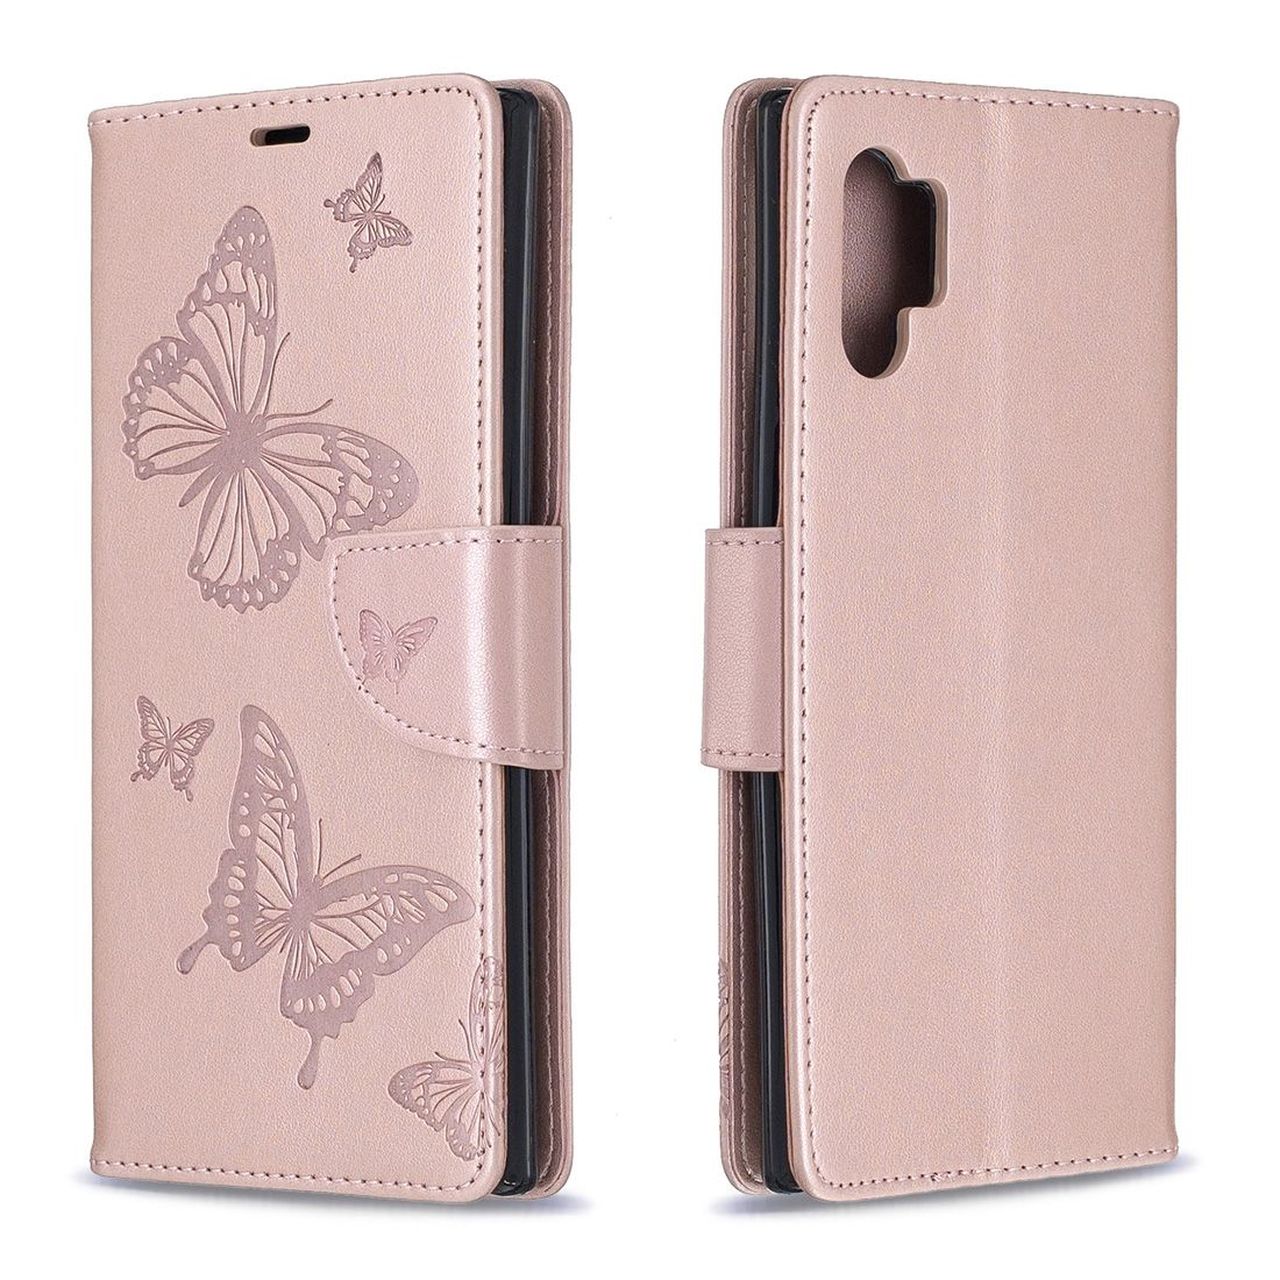 Samsung Galaxy Note 10+ Case Rose Gold Embossed Butterflies Pattern PU Leather Folio Cover with Card & Cash Slots, Stand